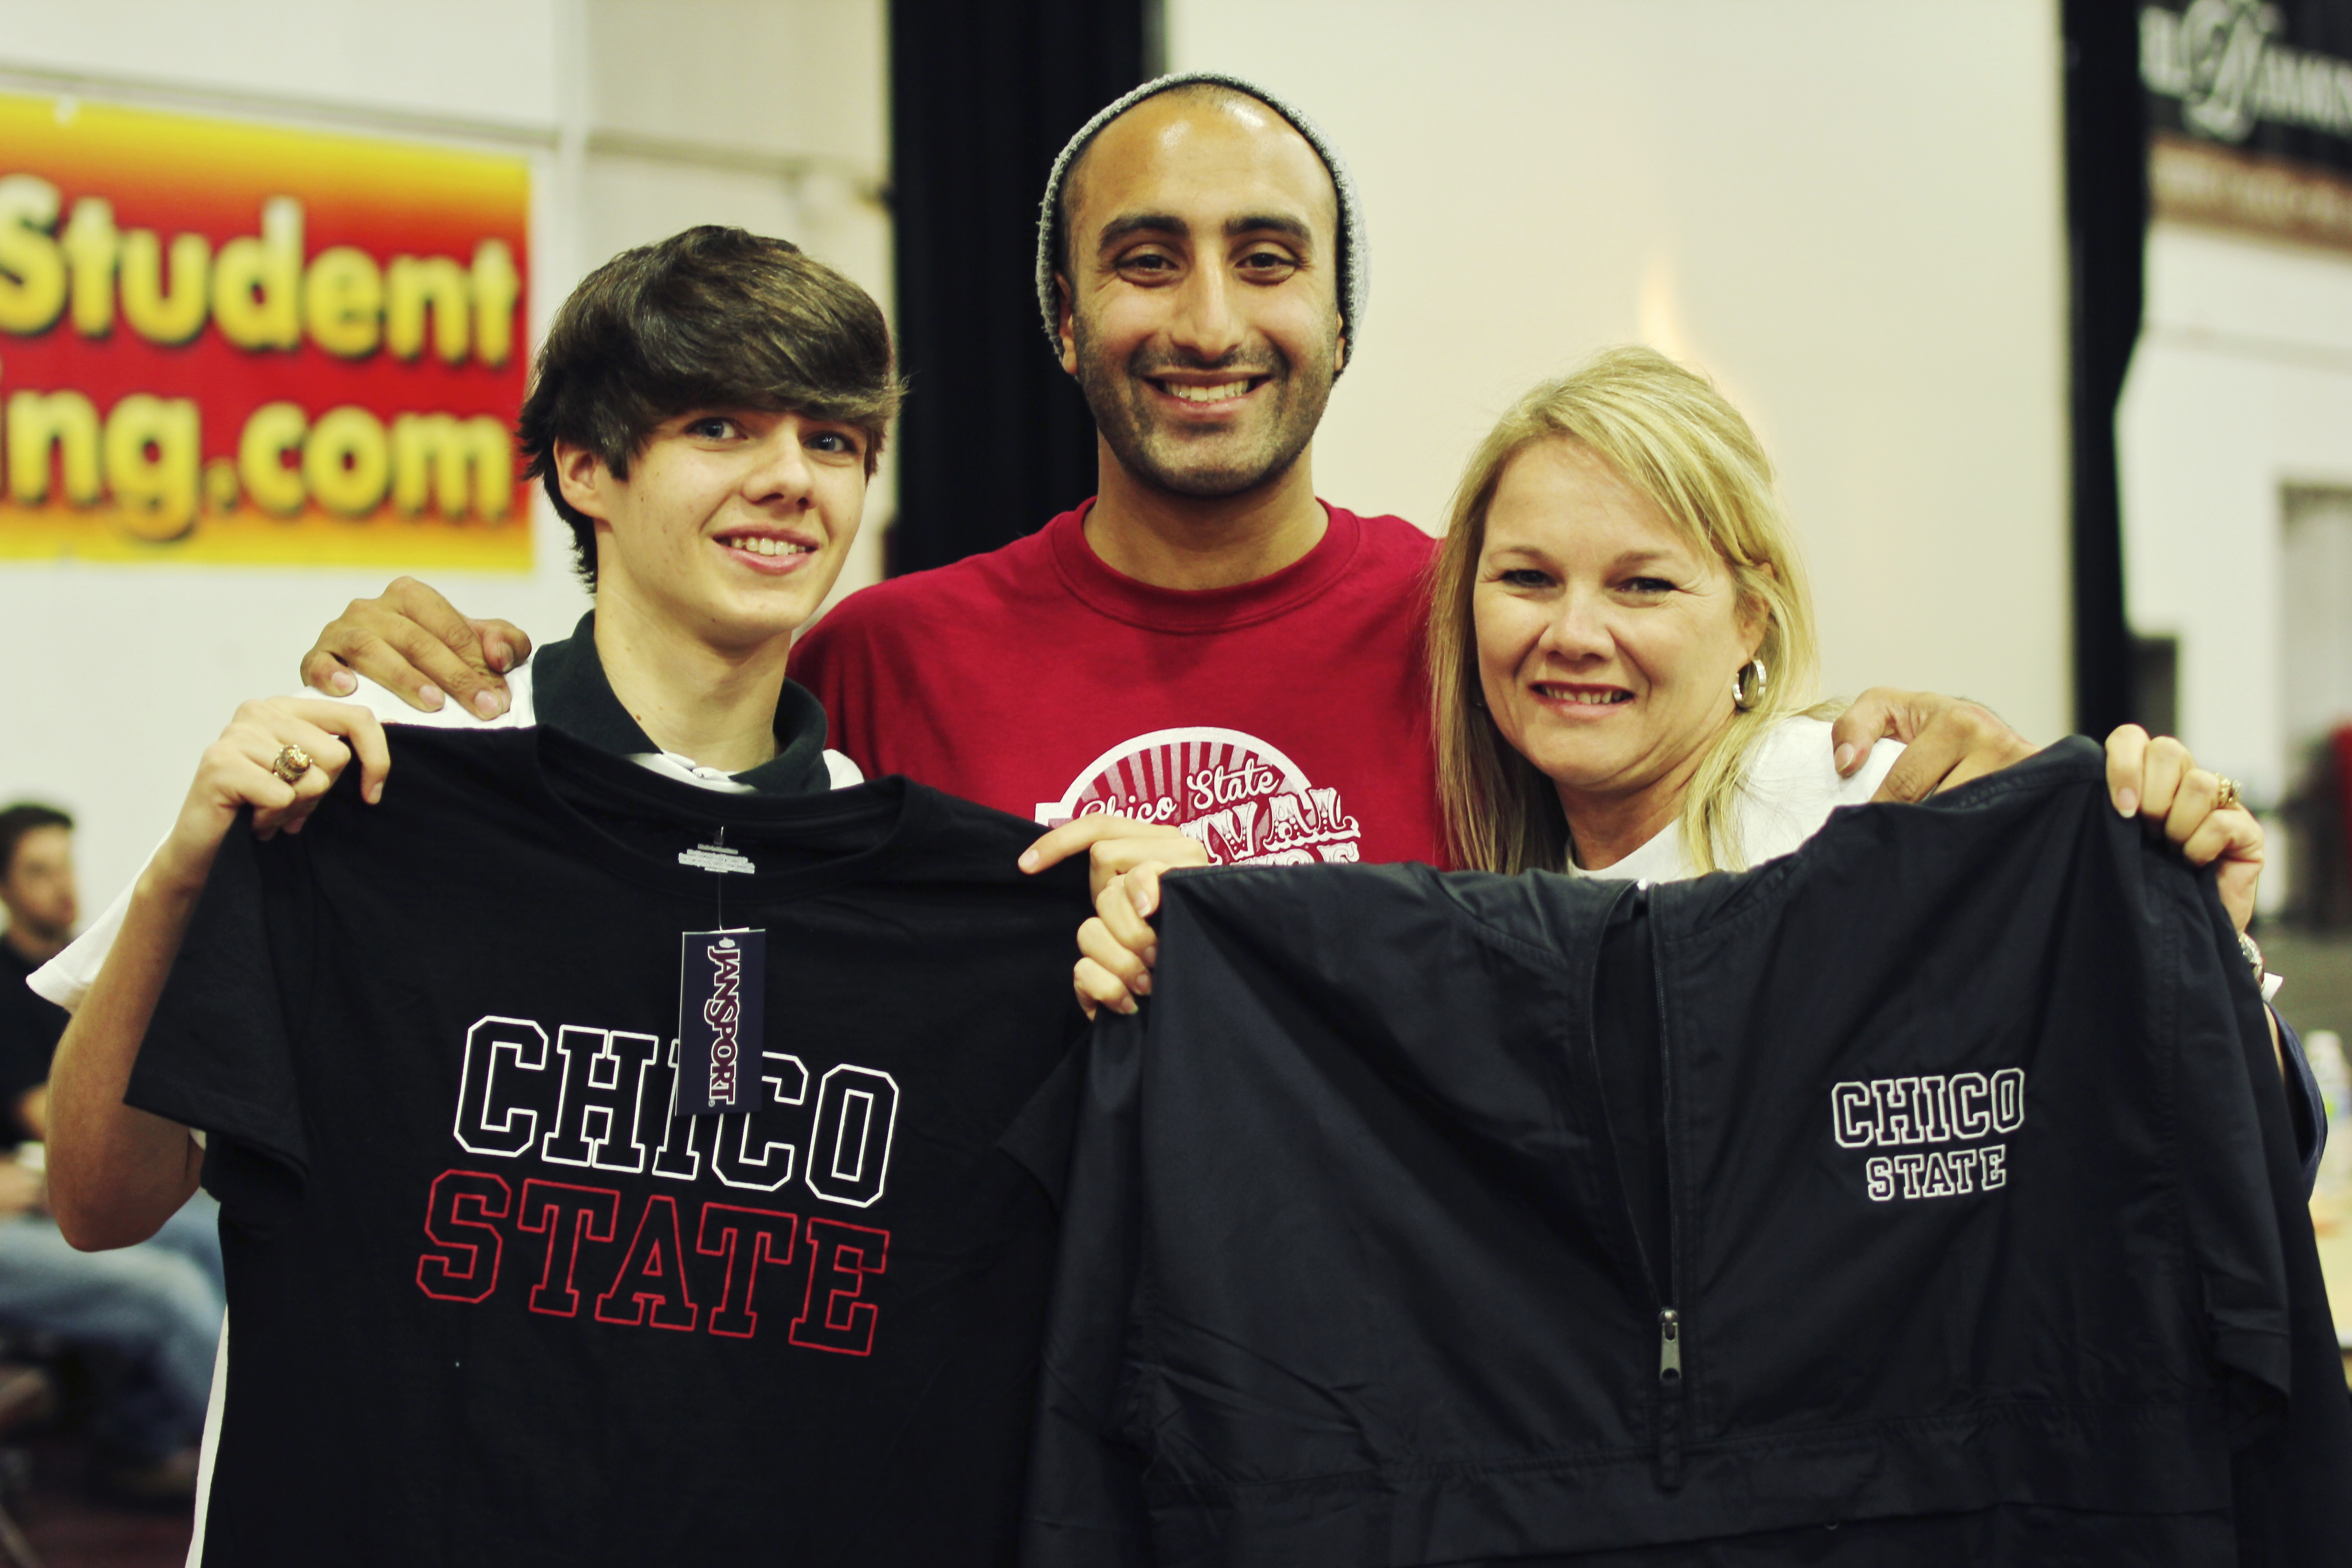 group of 3 people holding Chico state apparel